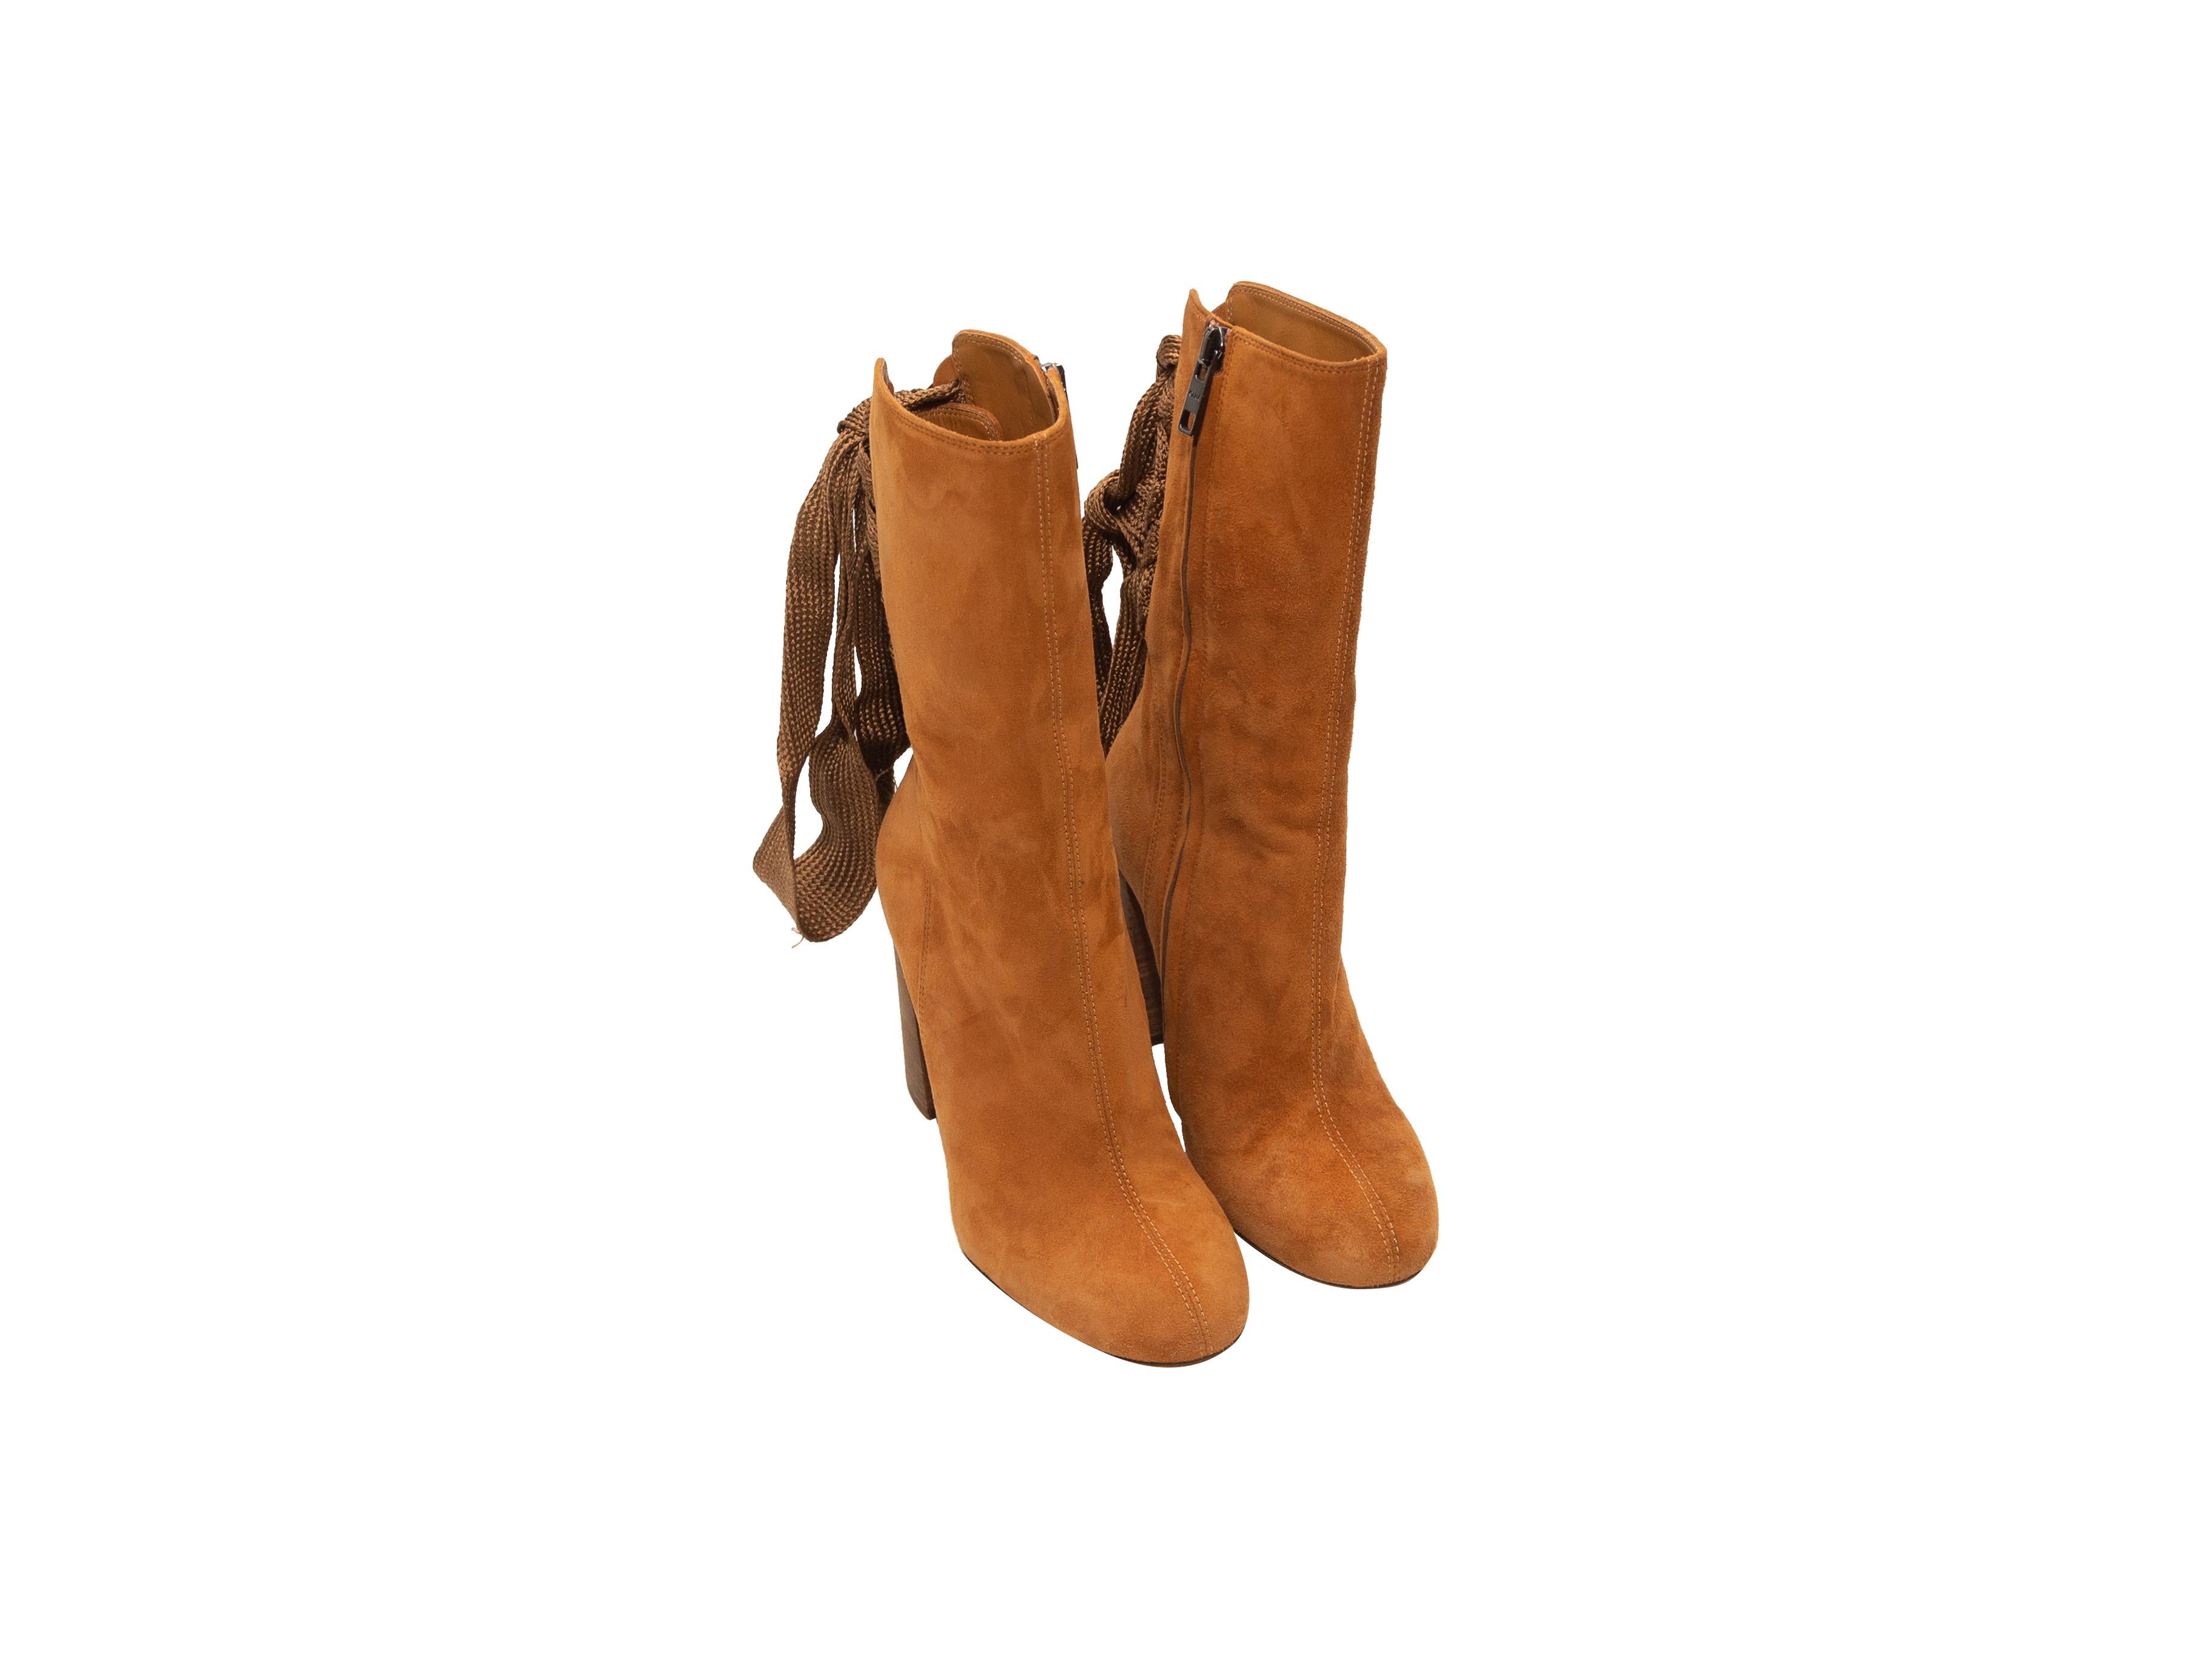 Product details: Tan suede round-toe Harper ankle boots by Chloe. Lace-up detailing at backs. Stacked heels. Zip closures at inner sides. Designer size 36. 3.5